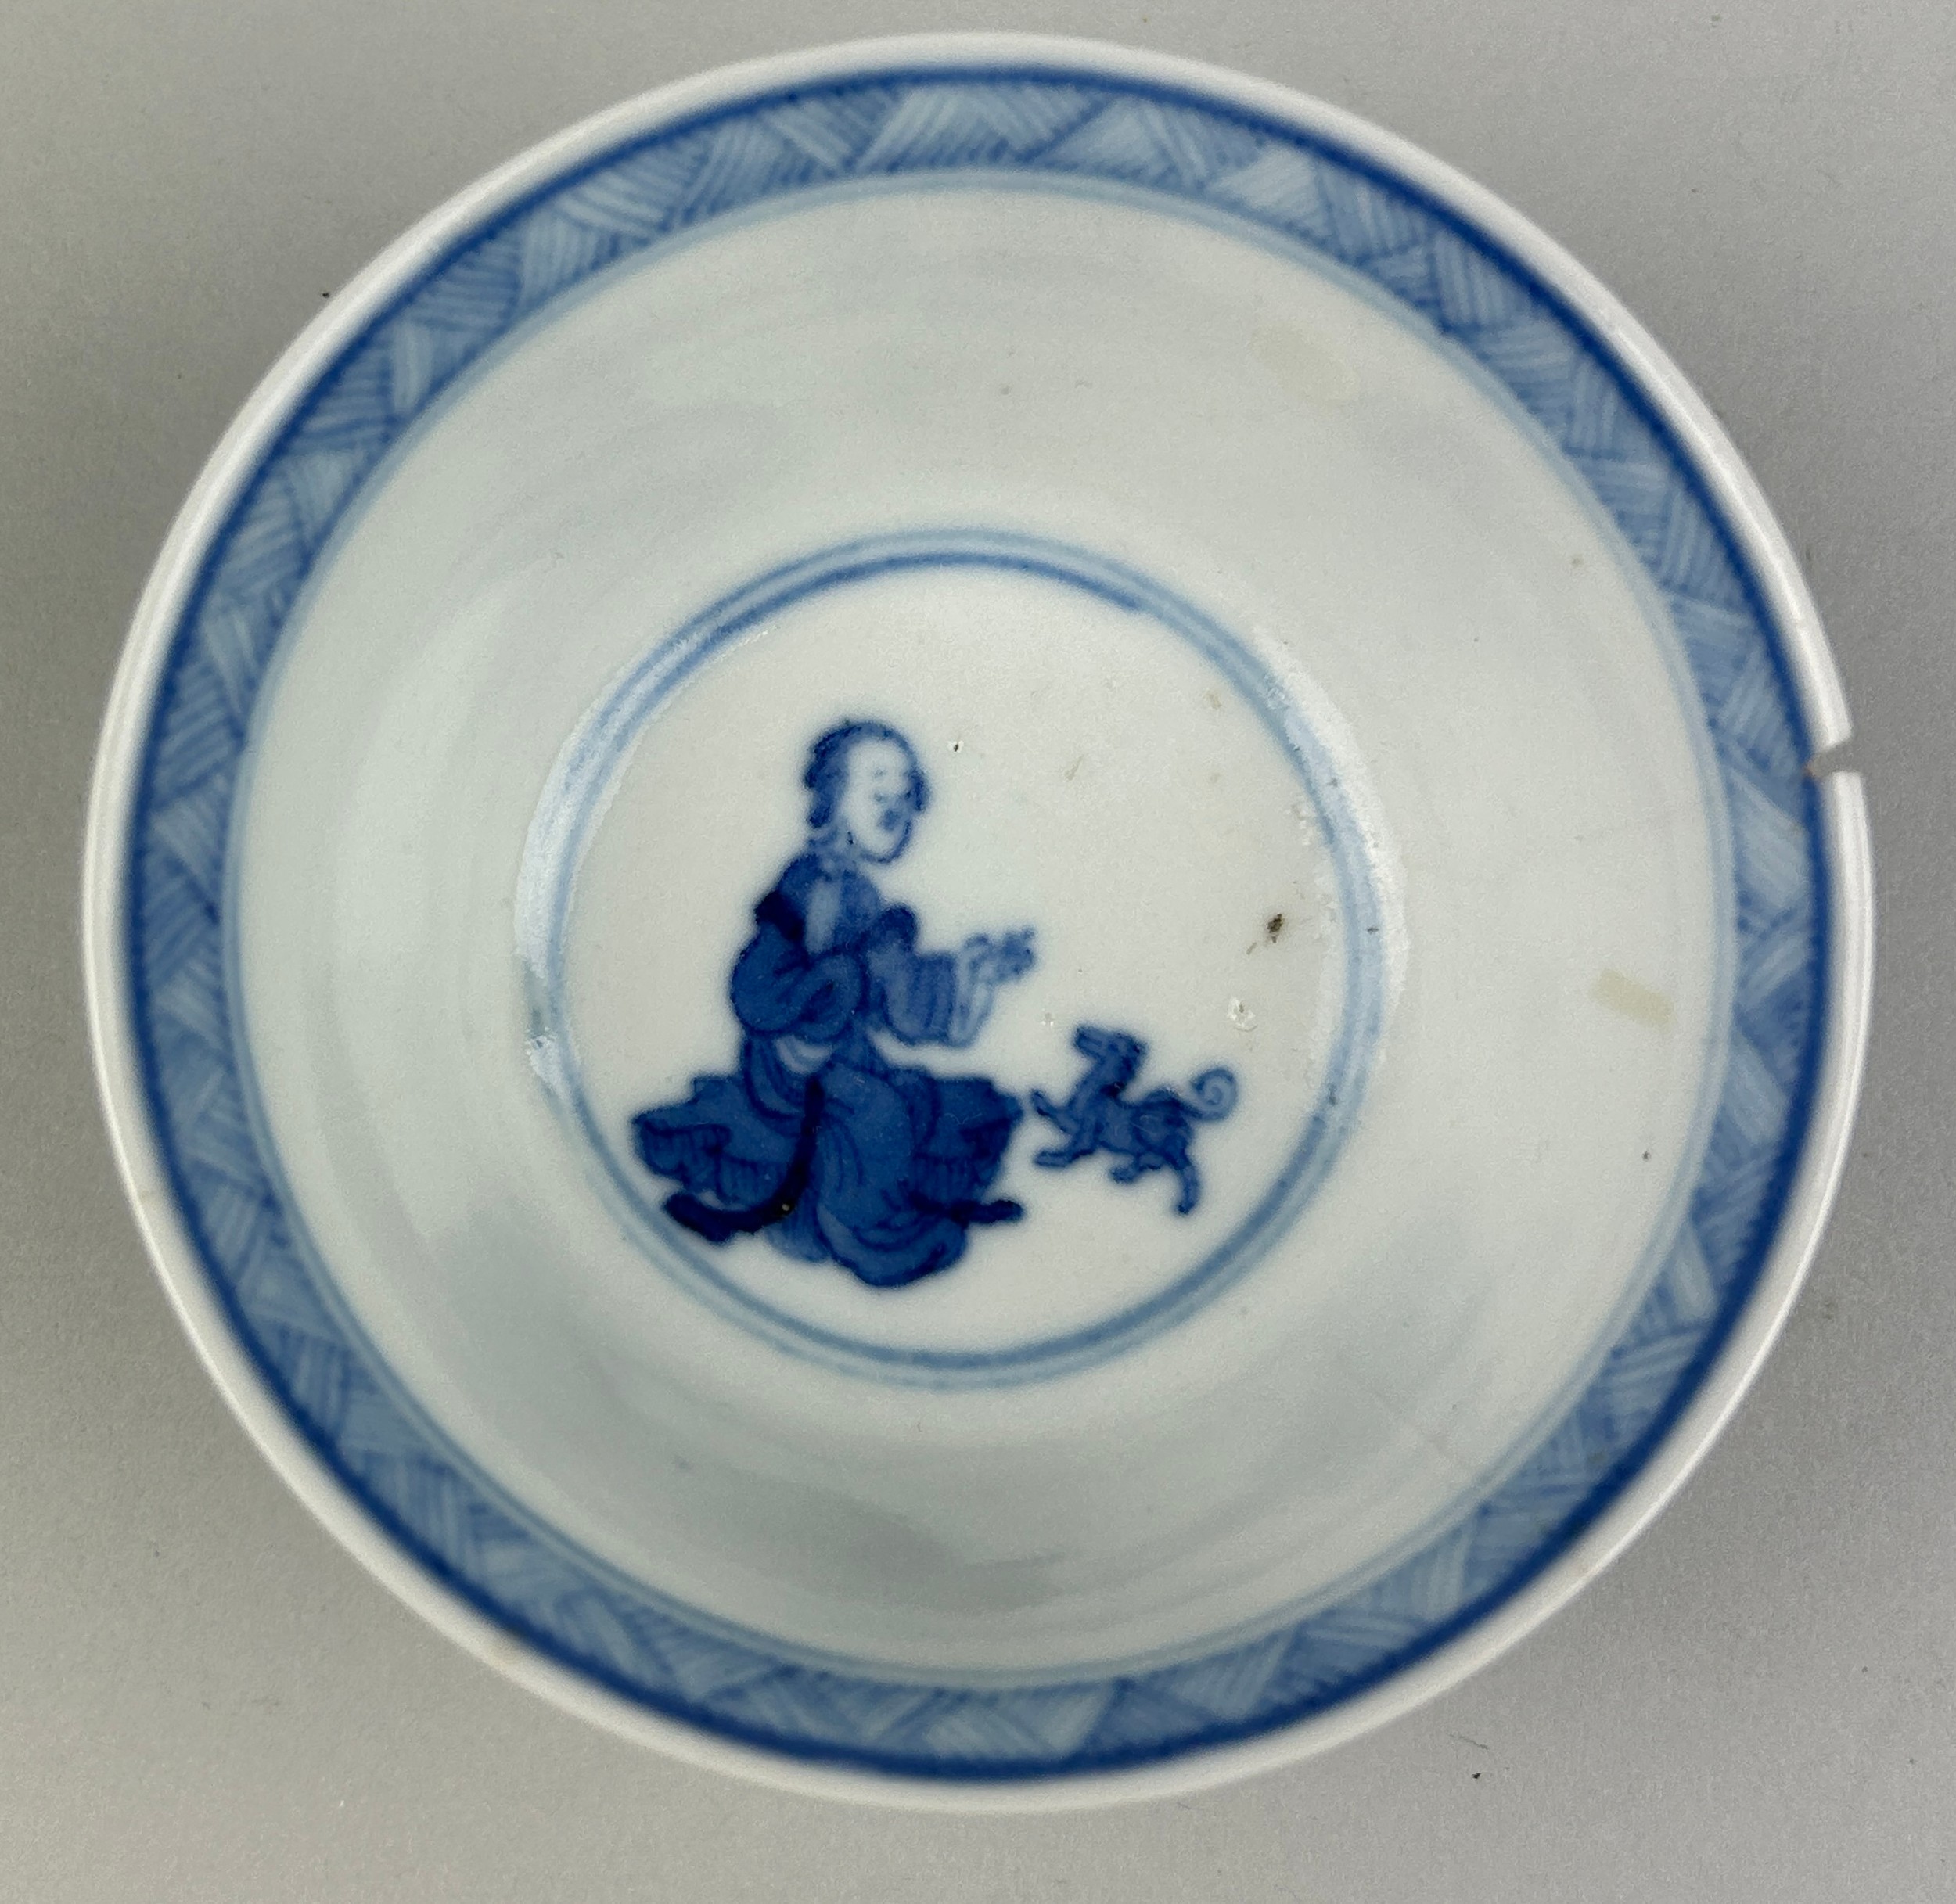 A CHINESE KANGXI PERIOD BOWL DECORATED WITH FIGURES, DOGS AND FLOWERS, 8cm x 8cm x 4.2cm - Image 4 of 6